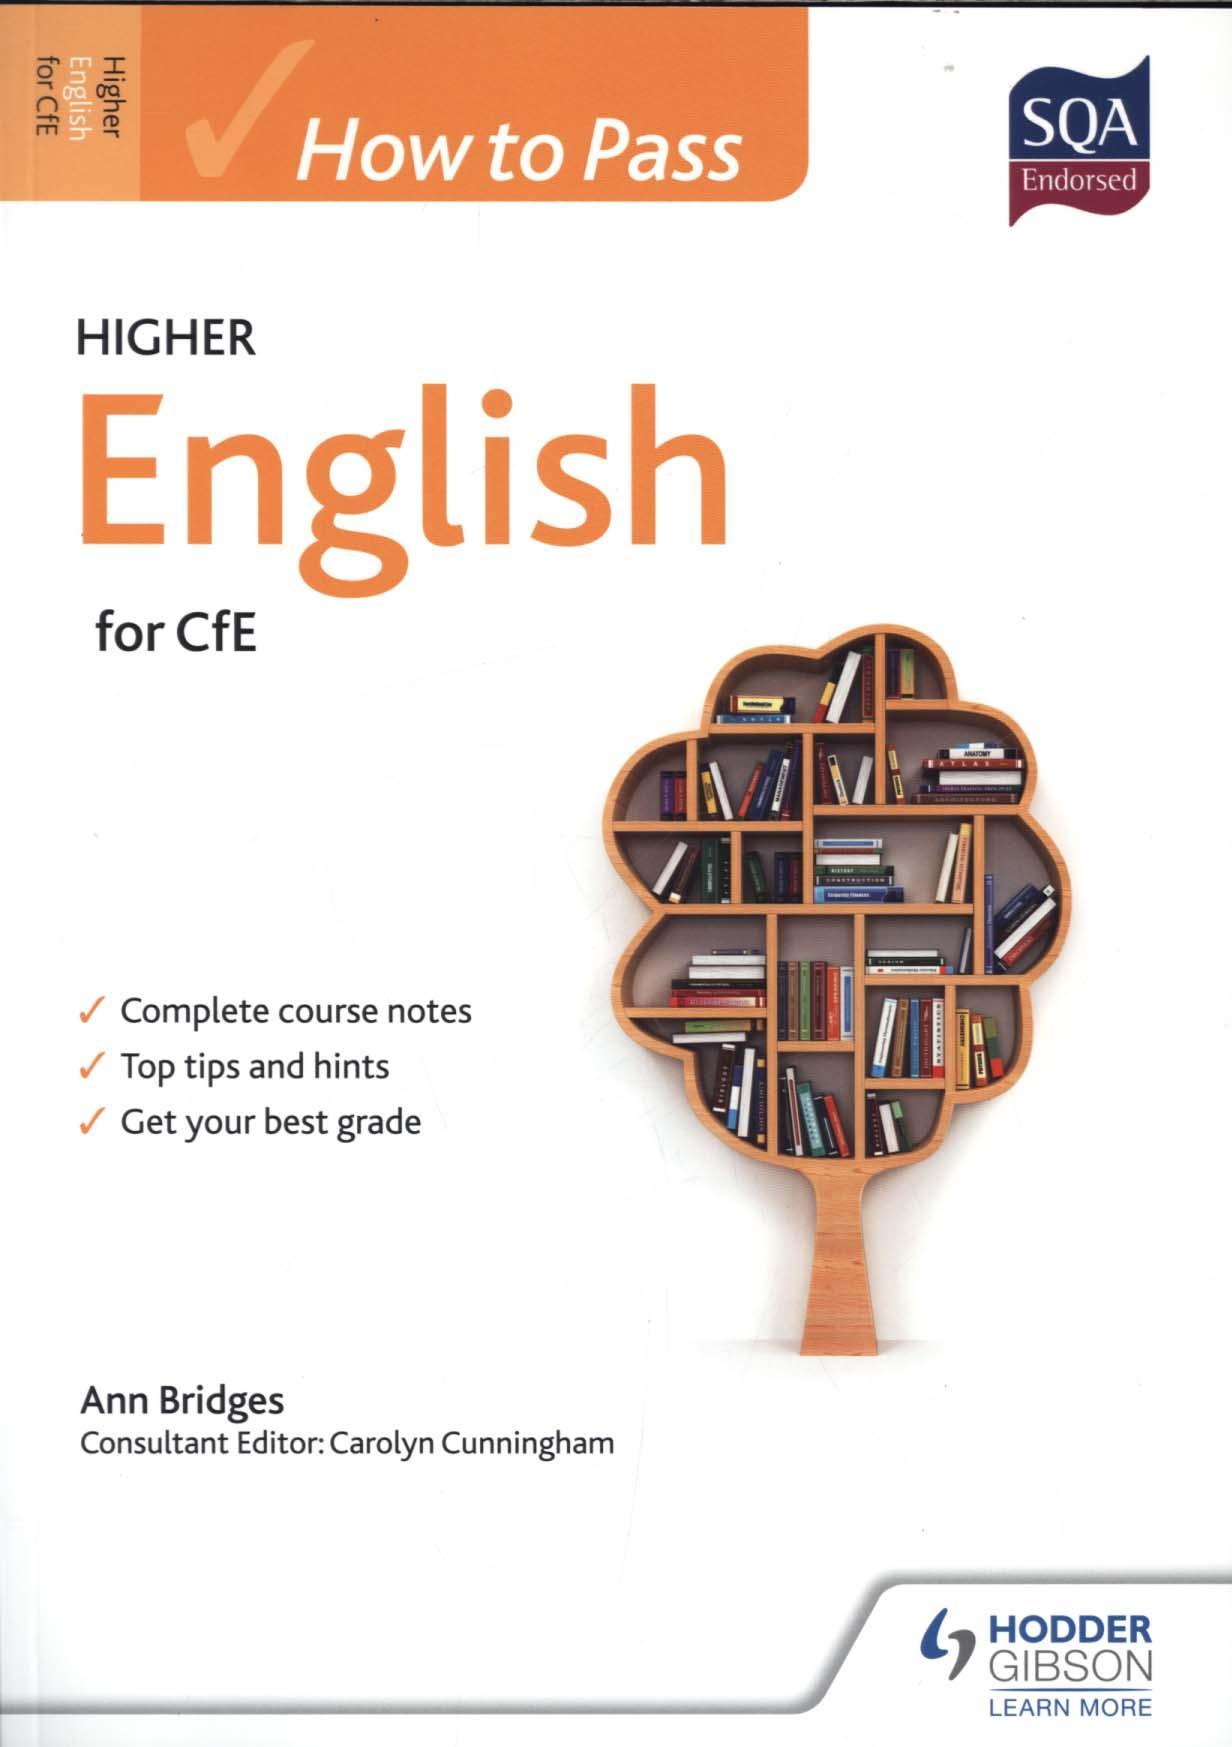 How to Pass Higher English for CFE